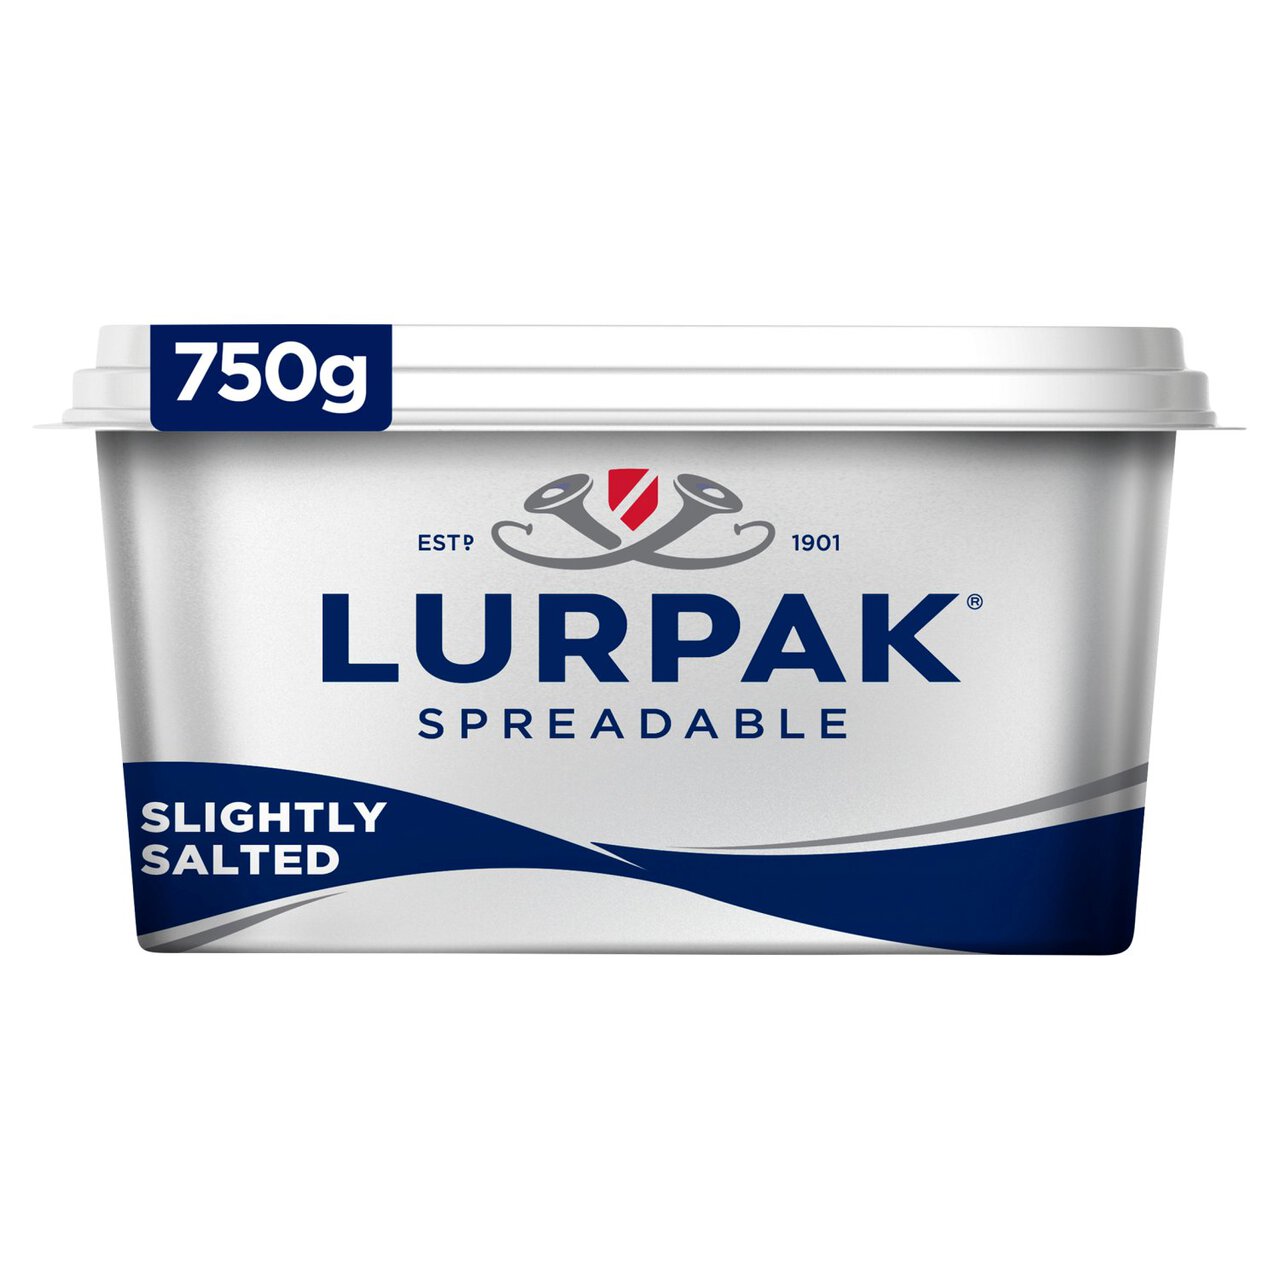 Lurpak Slightly Salted Spreadable Blend of Butter and Rapeseed Oil 750g